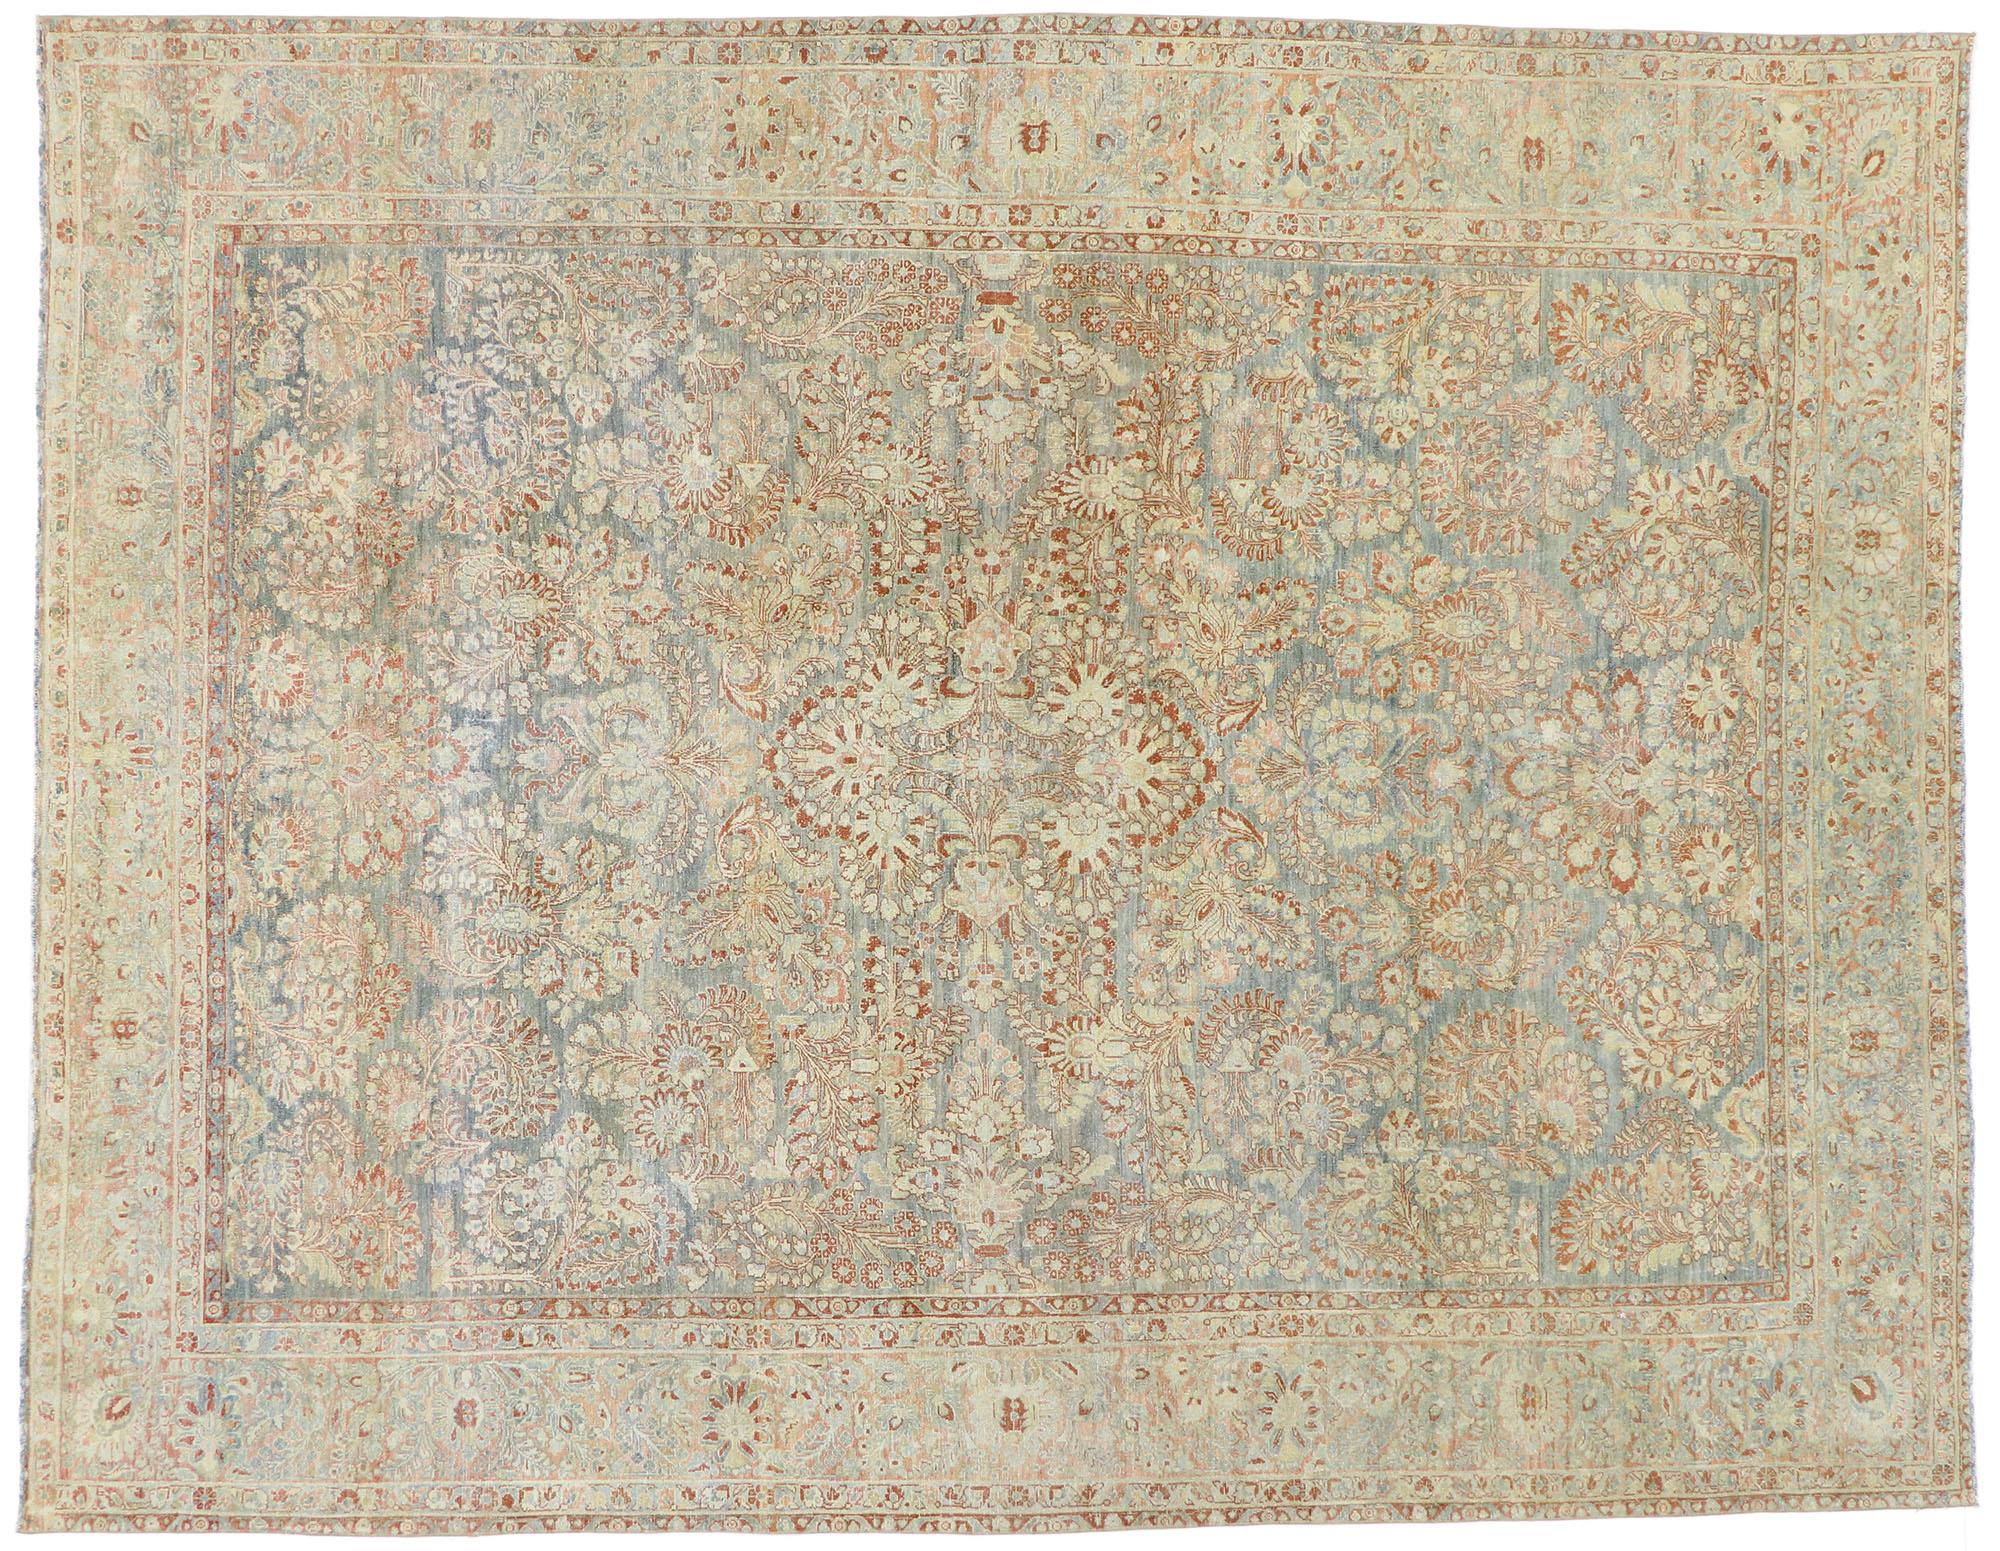 53481 Distressed Antique Persian Sarouk rug with Rustic Italian Style 08'10 x 11'03. Emanating Italian Rustic style and lovingly timeworn appearance combined with brilliant blues and warm orange hues inspired by Italy, this hand knotted wool